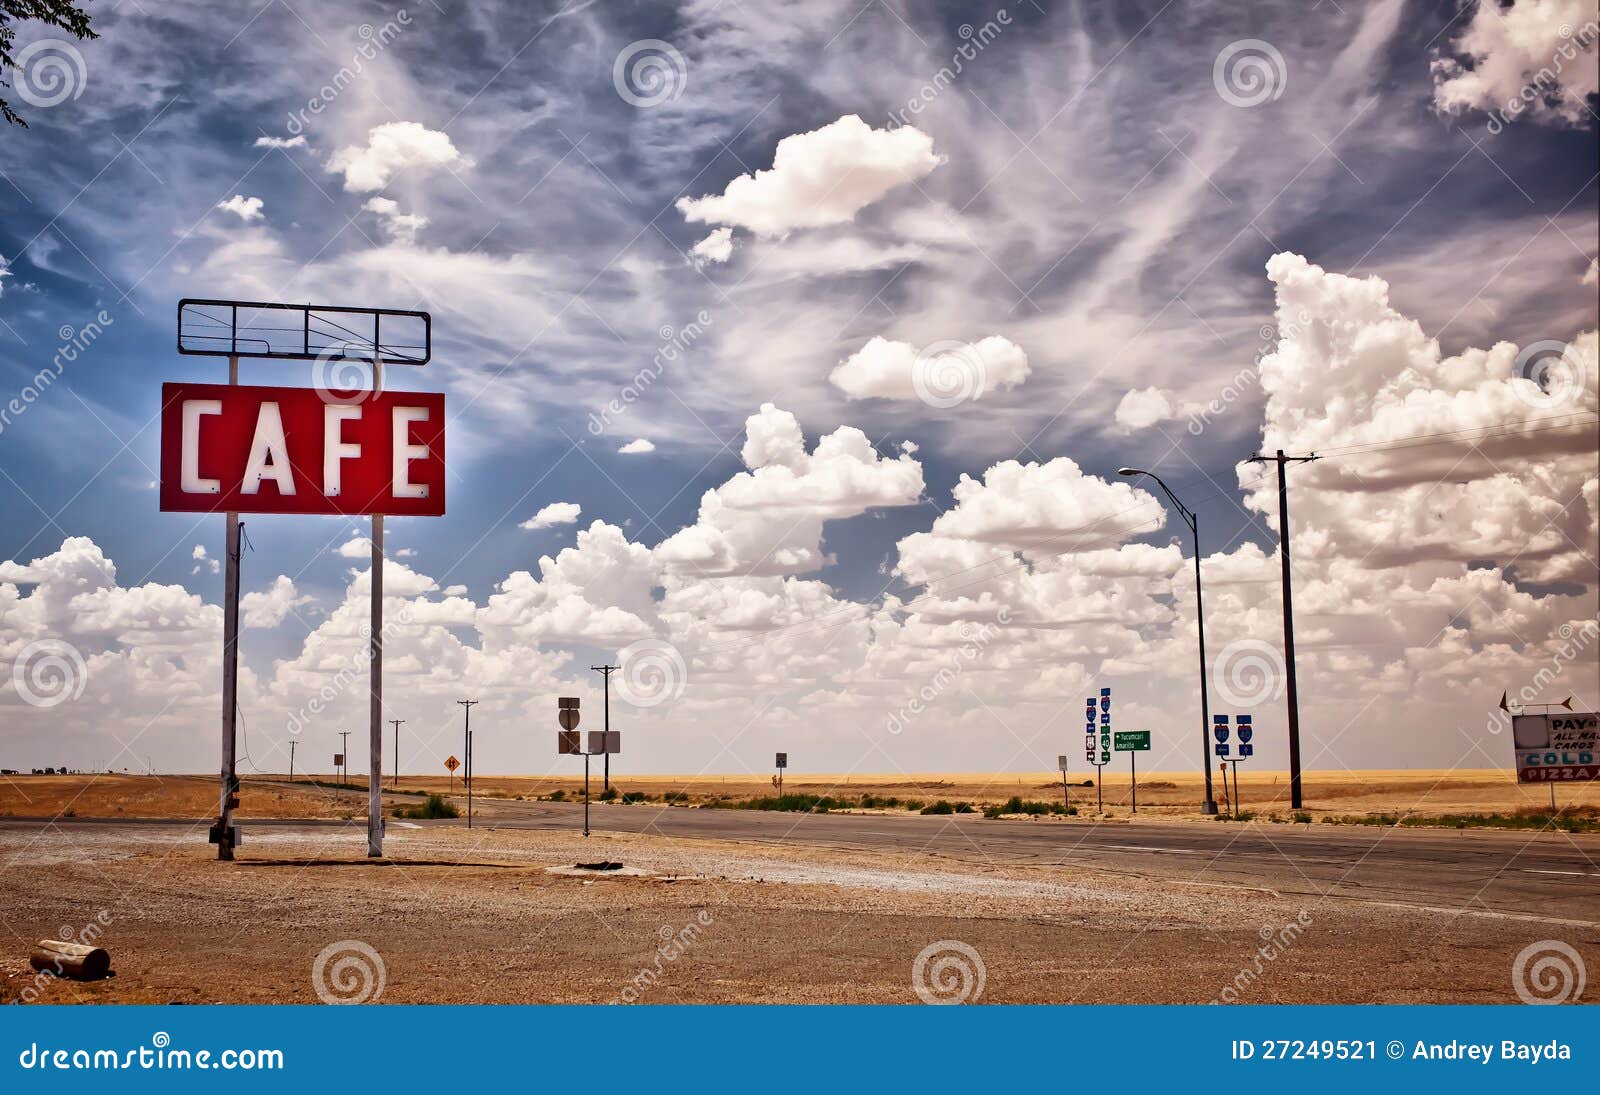 cafe sign along historic route 66 in texas.